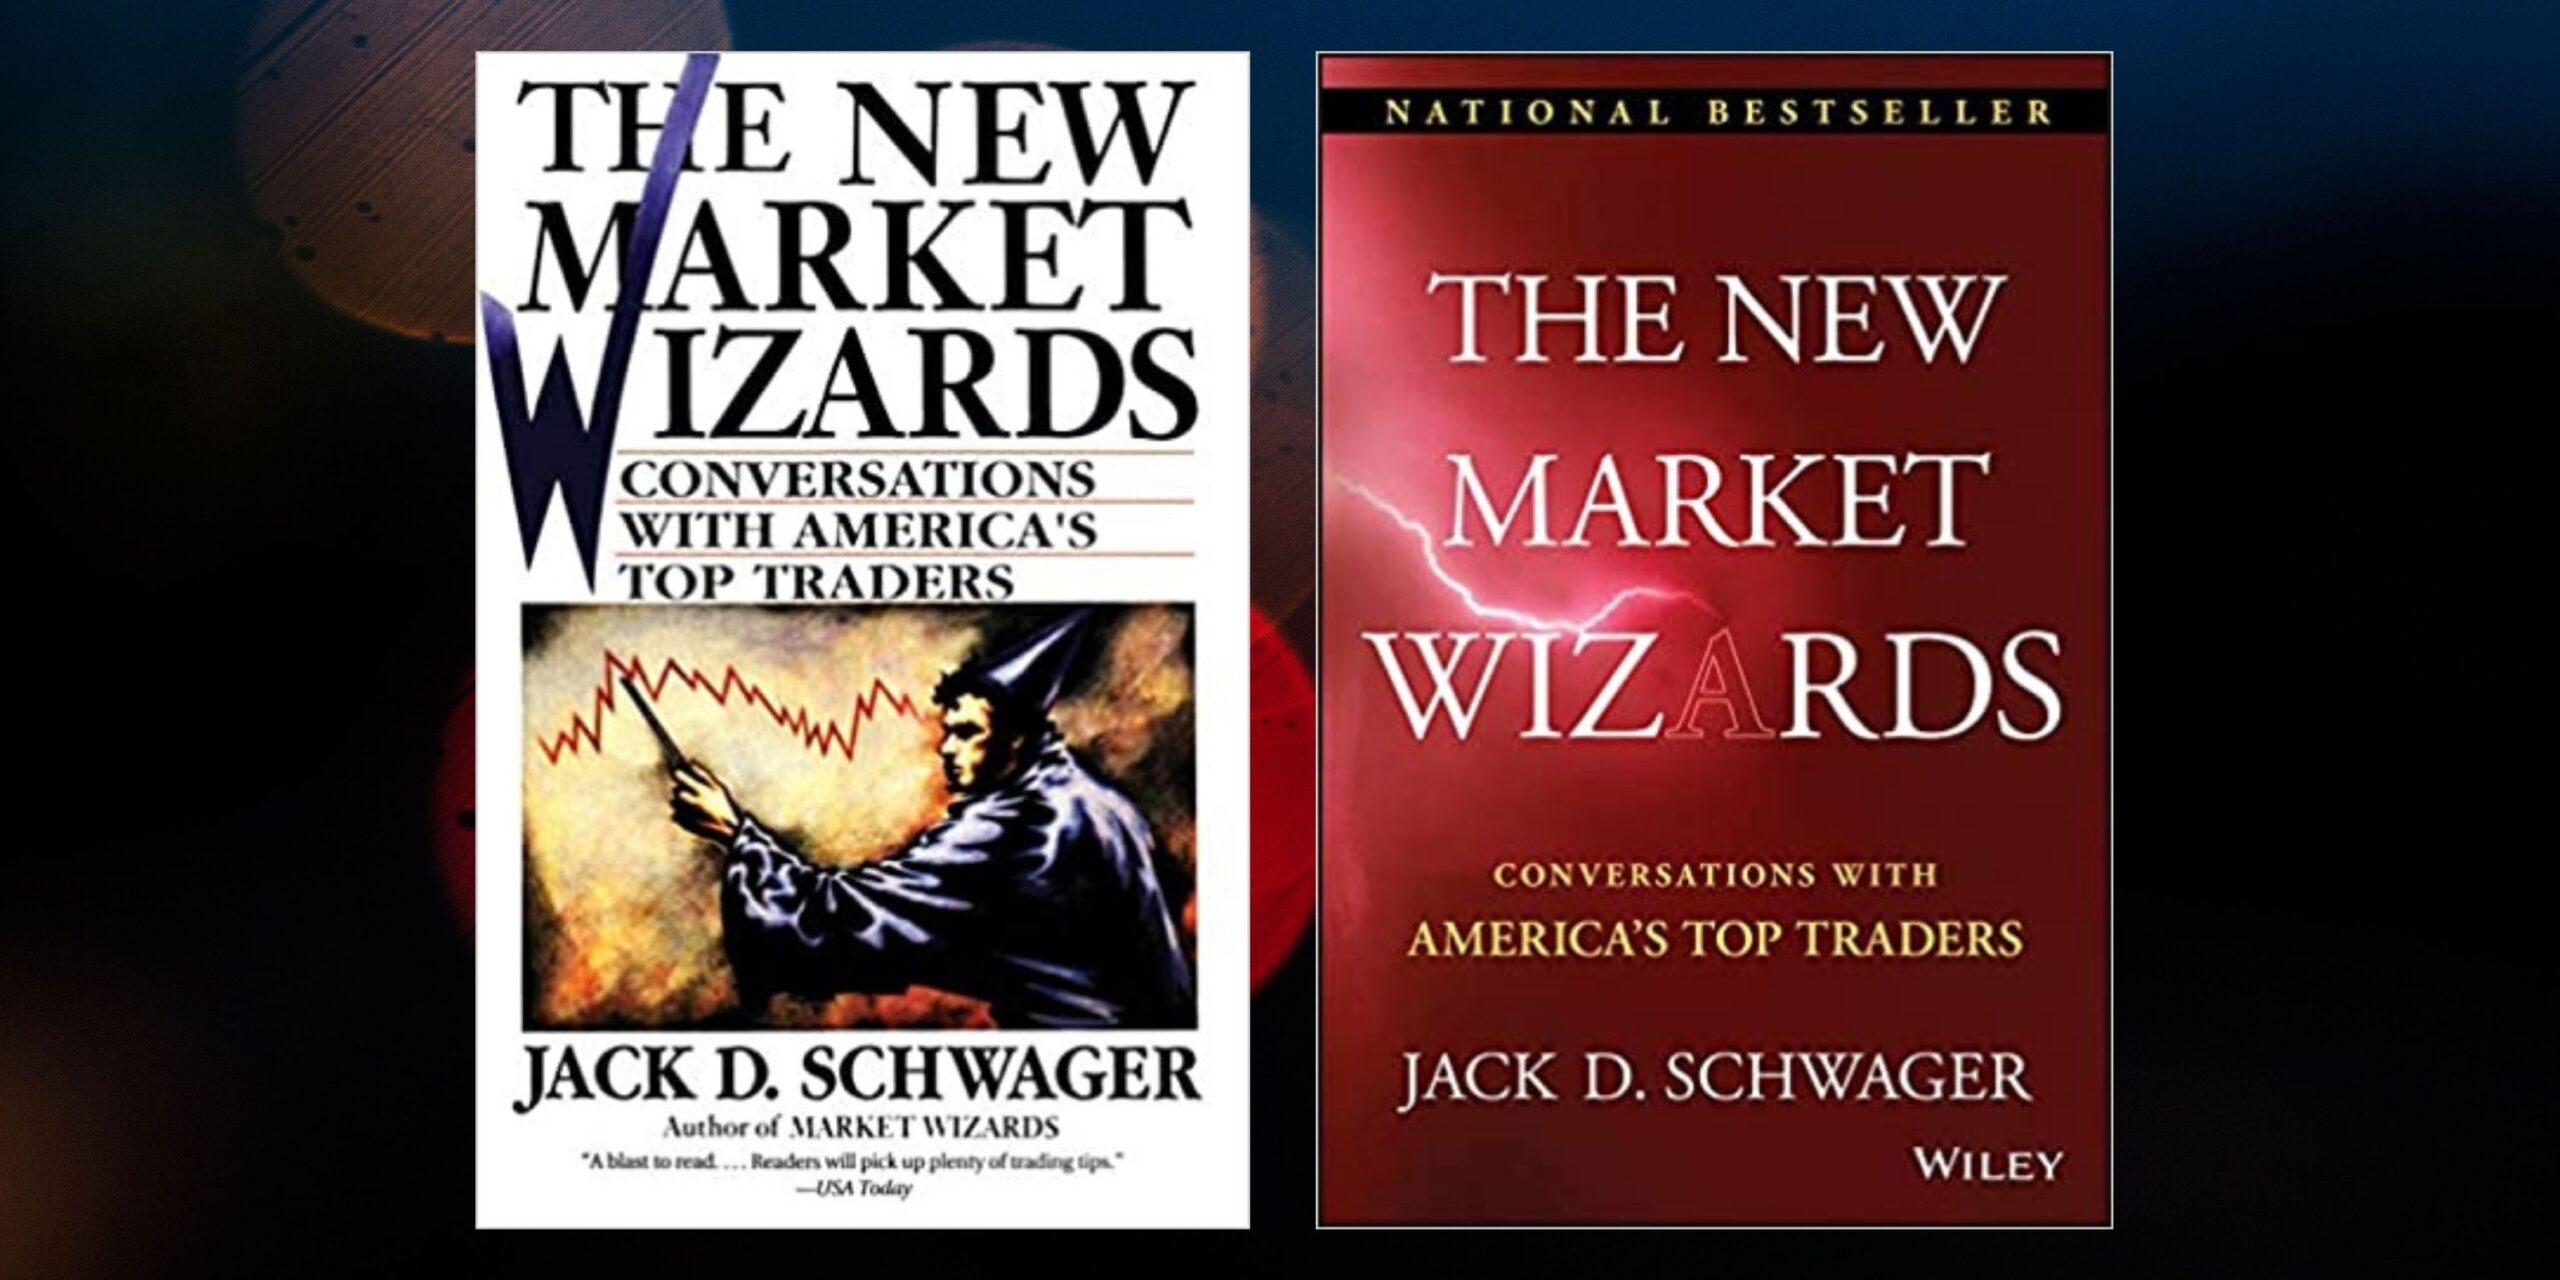 5 Reasons To Love Jack D. Schwager’s Legendary Stock Trading Book “THE NEW MARKET WIZARDS”